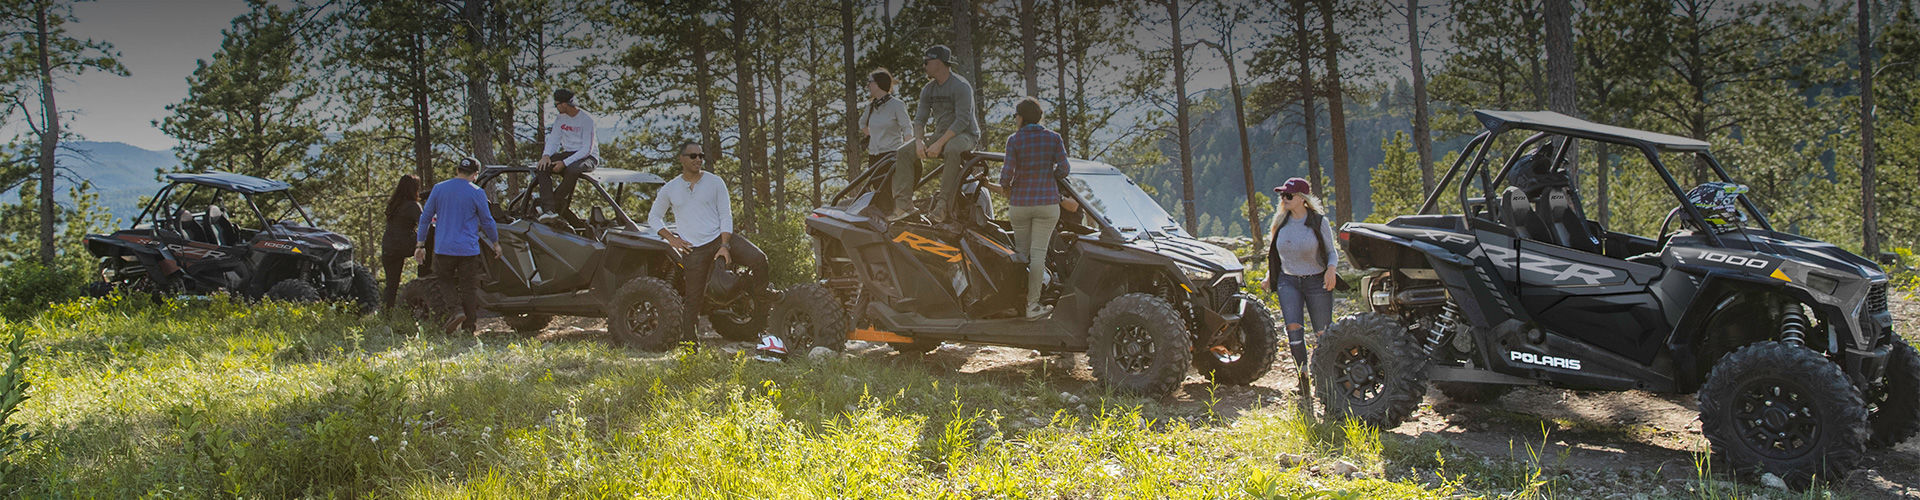 Rent an ATV or RZR today!